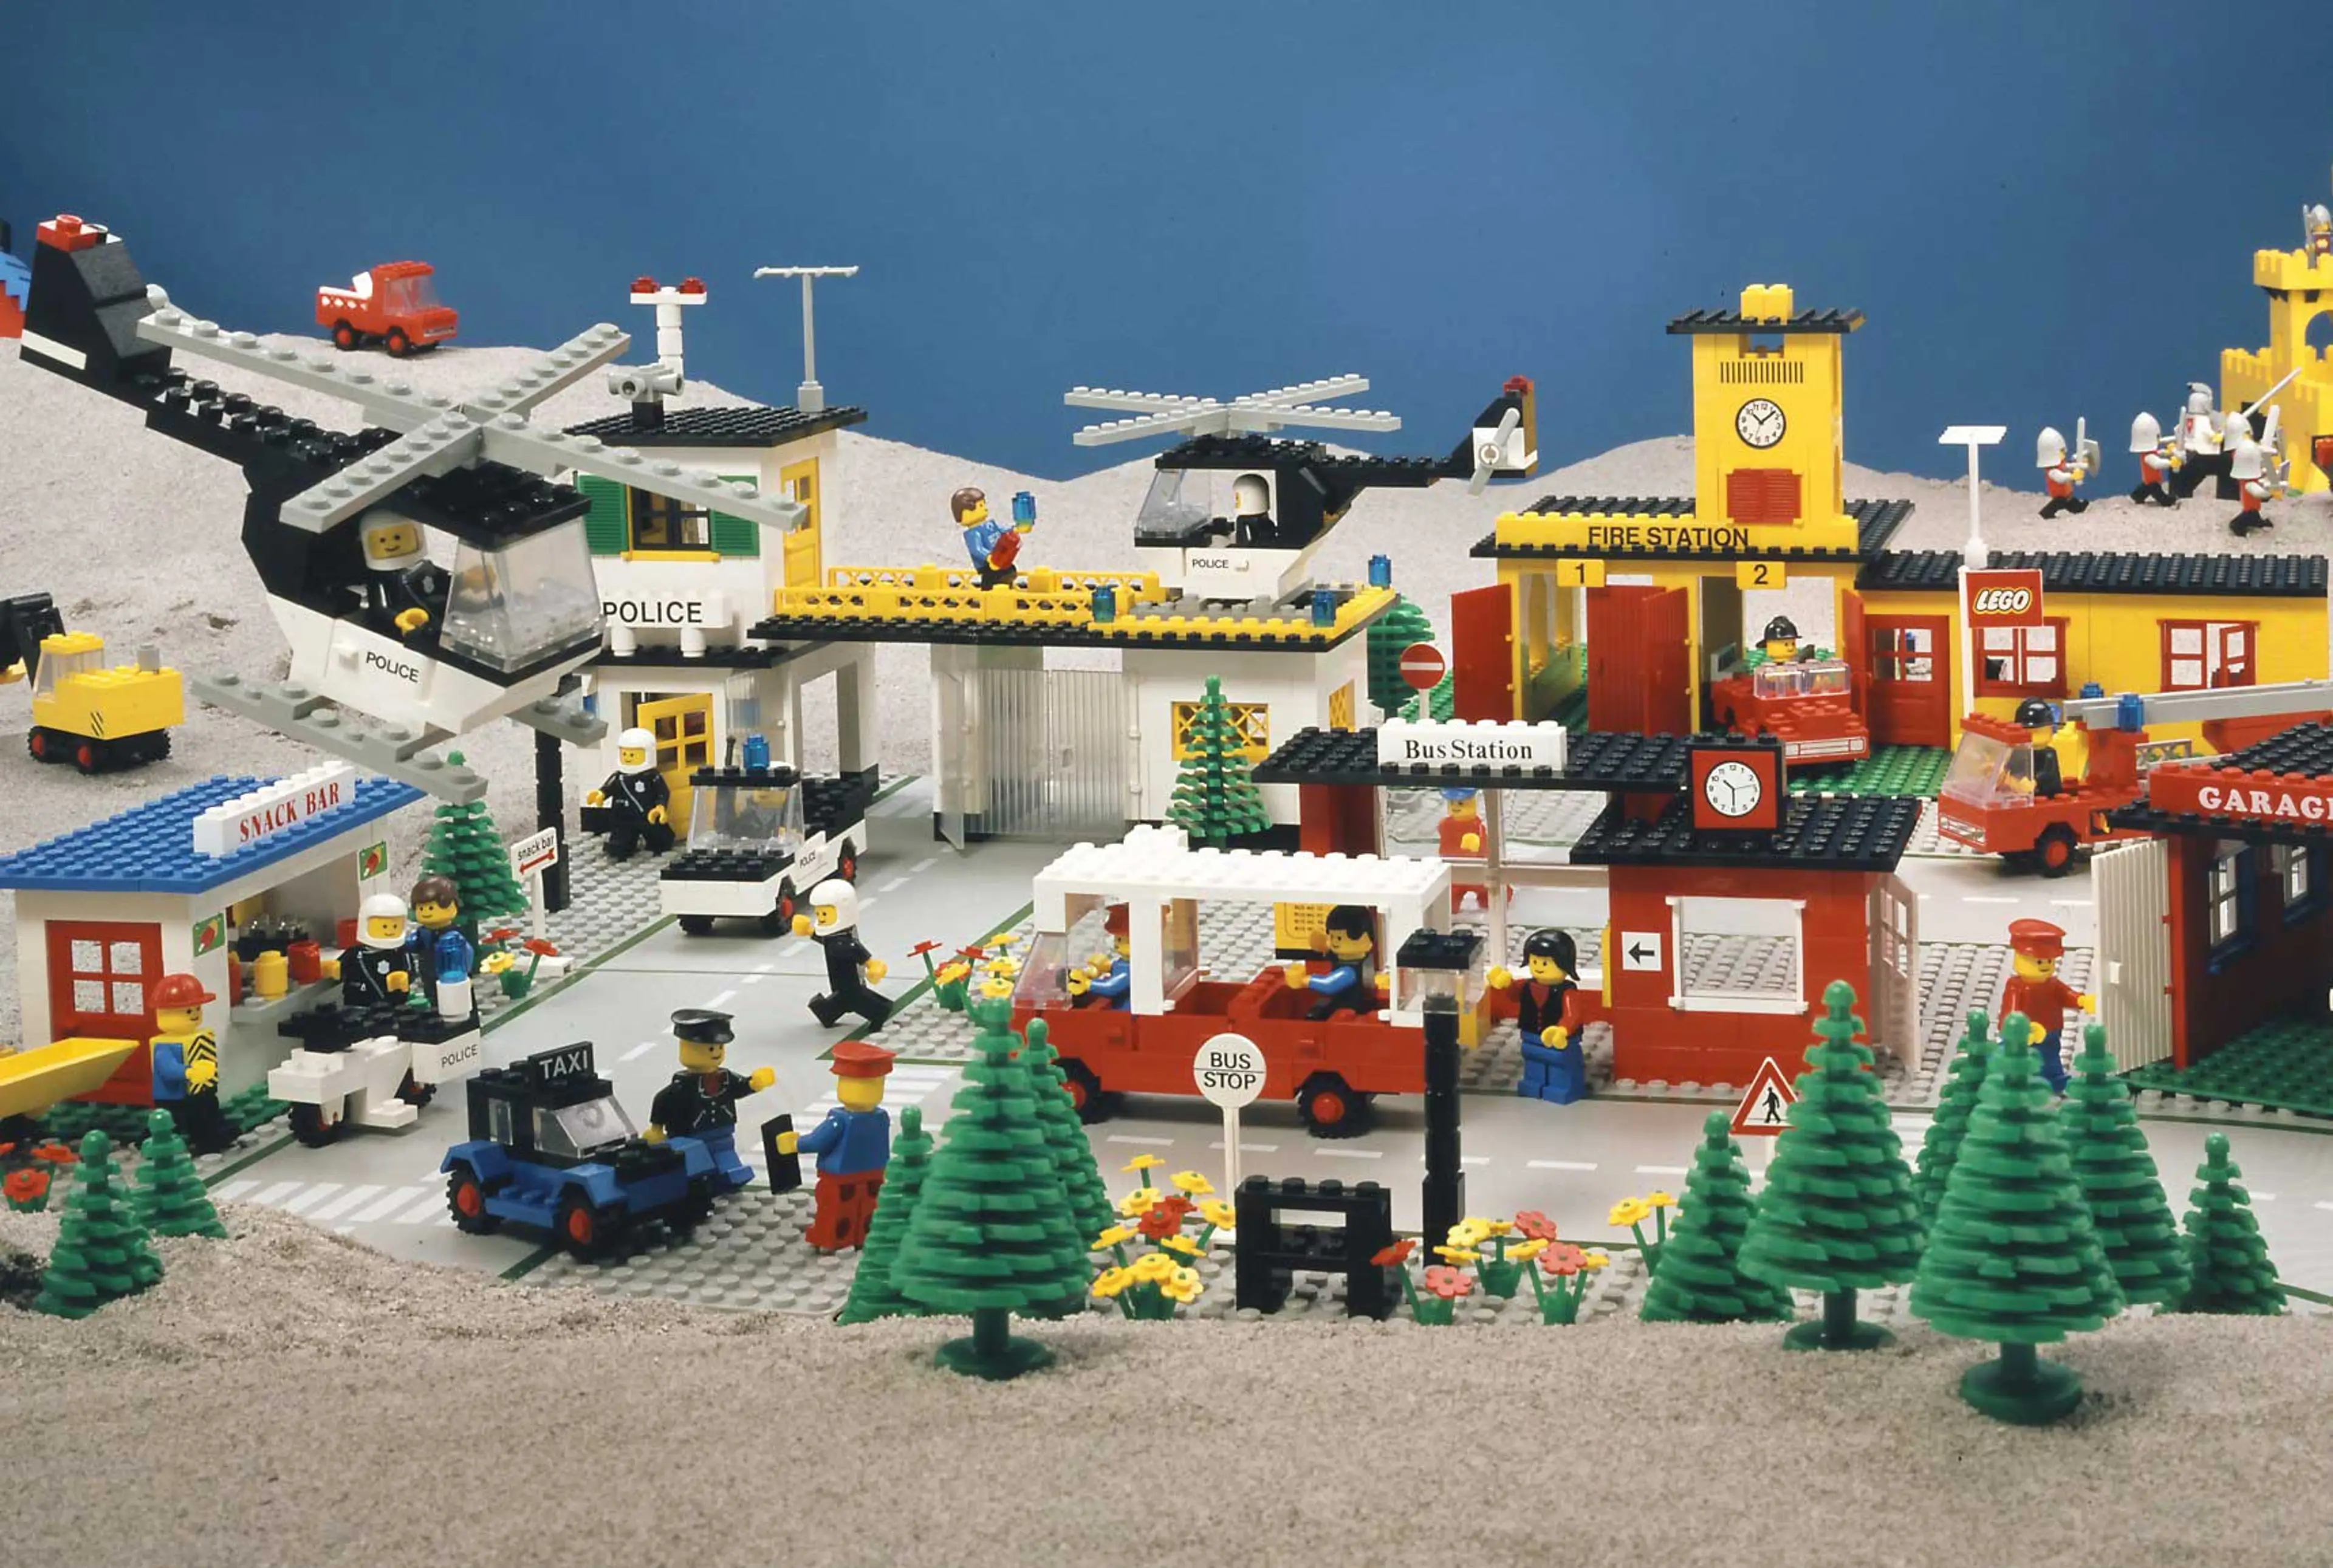 Environment with various LEGOLAND Town sets